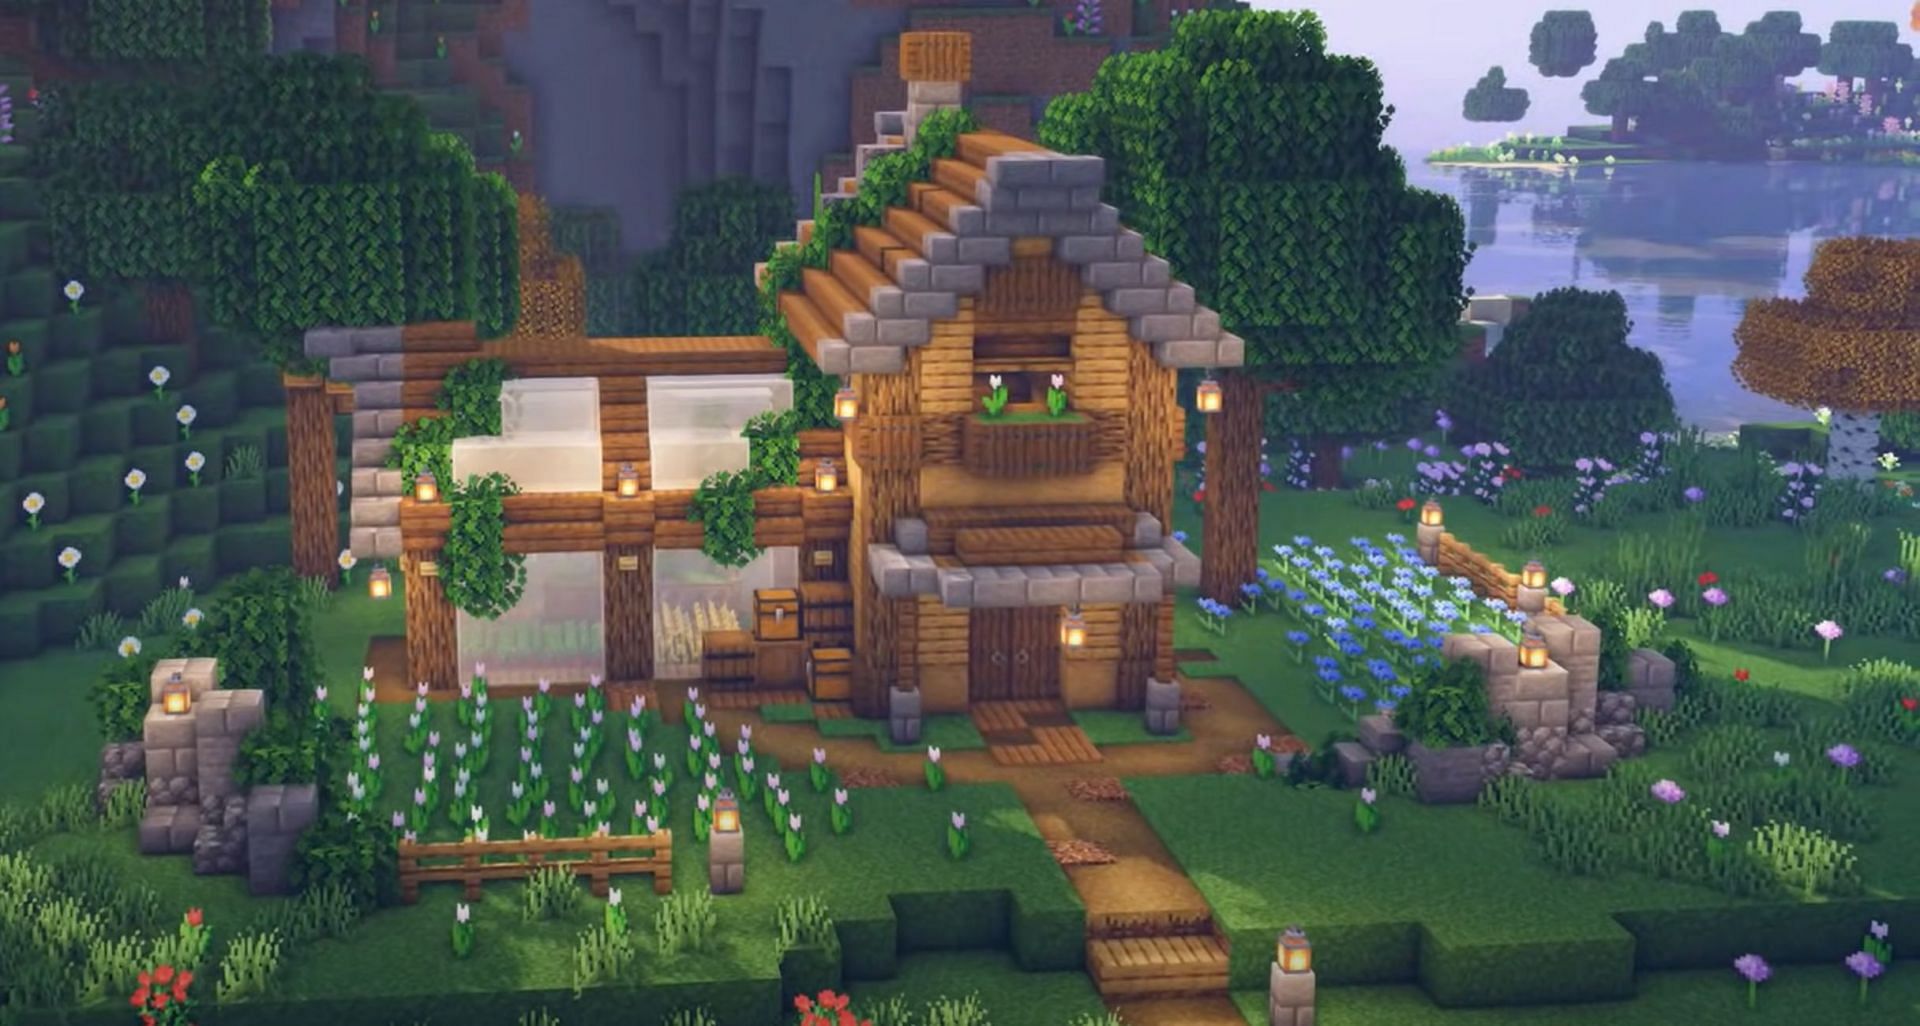 This design ensures Minecraft players and their crops are safe from any trouble (Image via Dio Rods/YouTube)